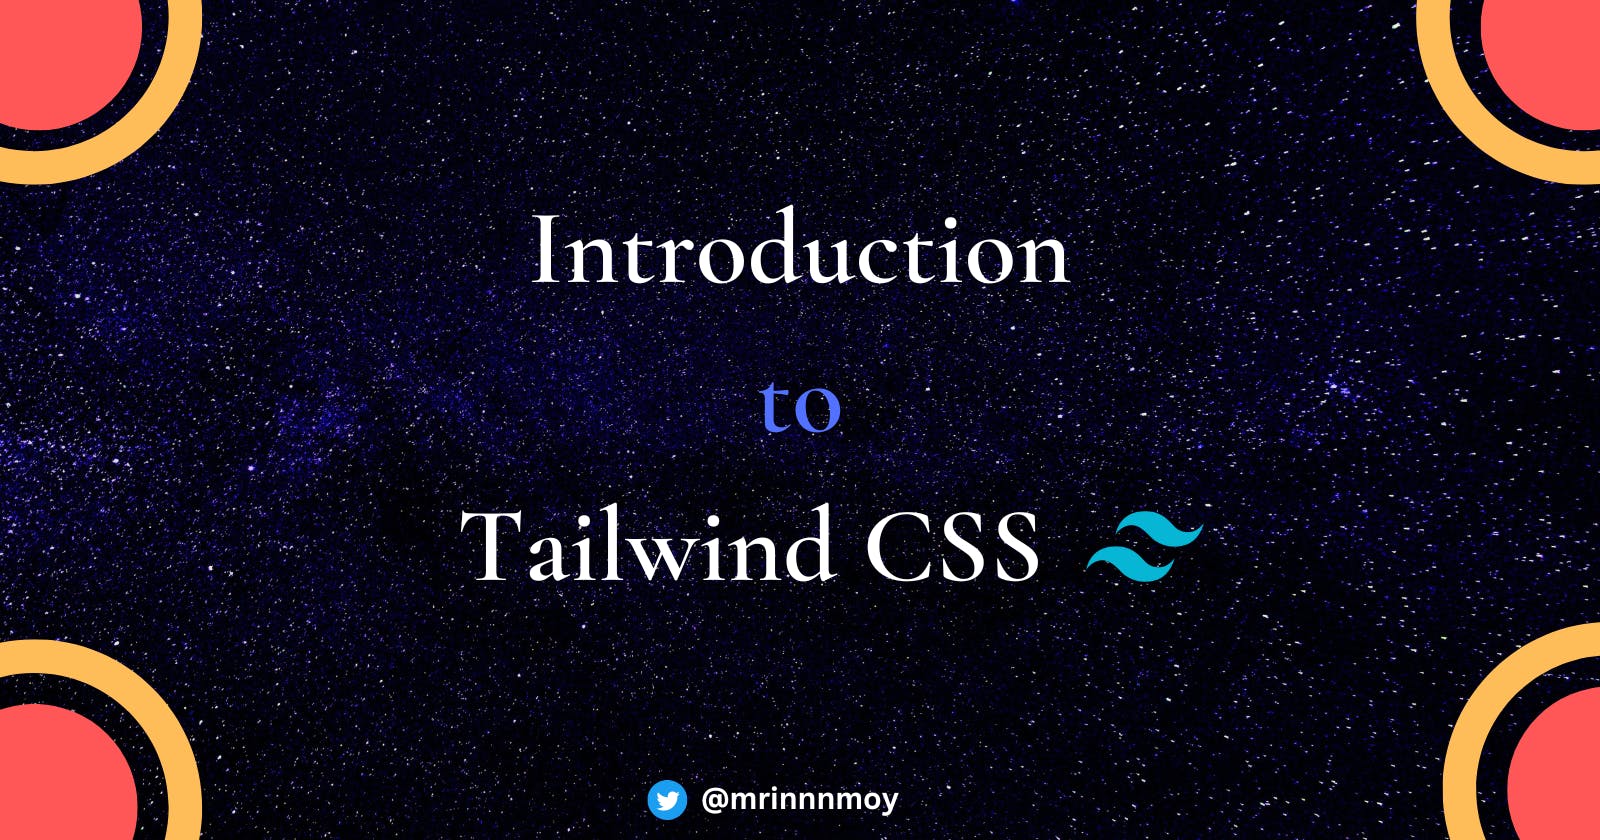 Introduction to Tailwind CSS.